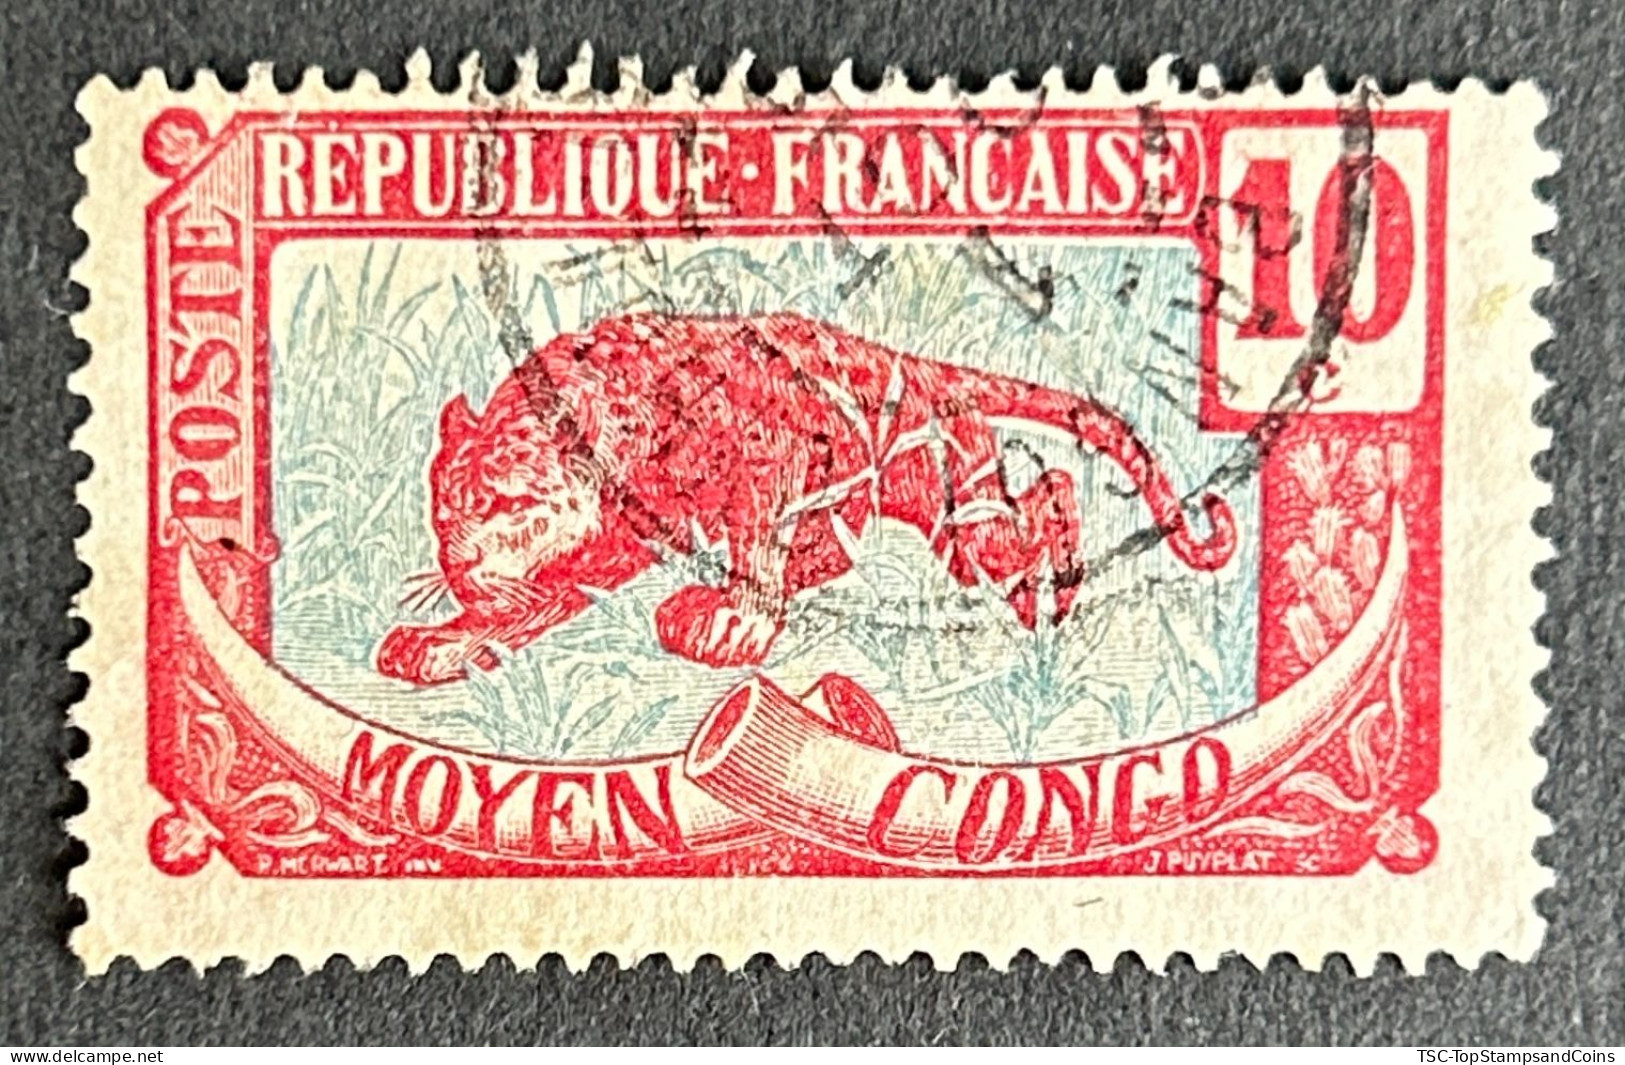 FRCG052U9 - Leopard - 10 C Used Stamp - Middle Congo - 1907 - Used Stamps